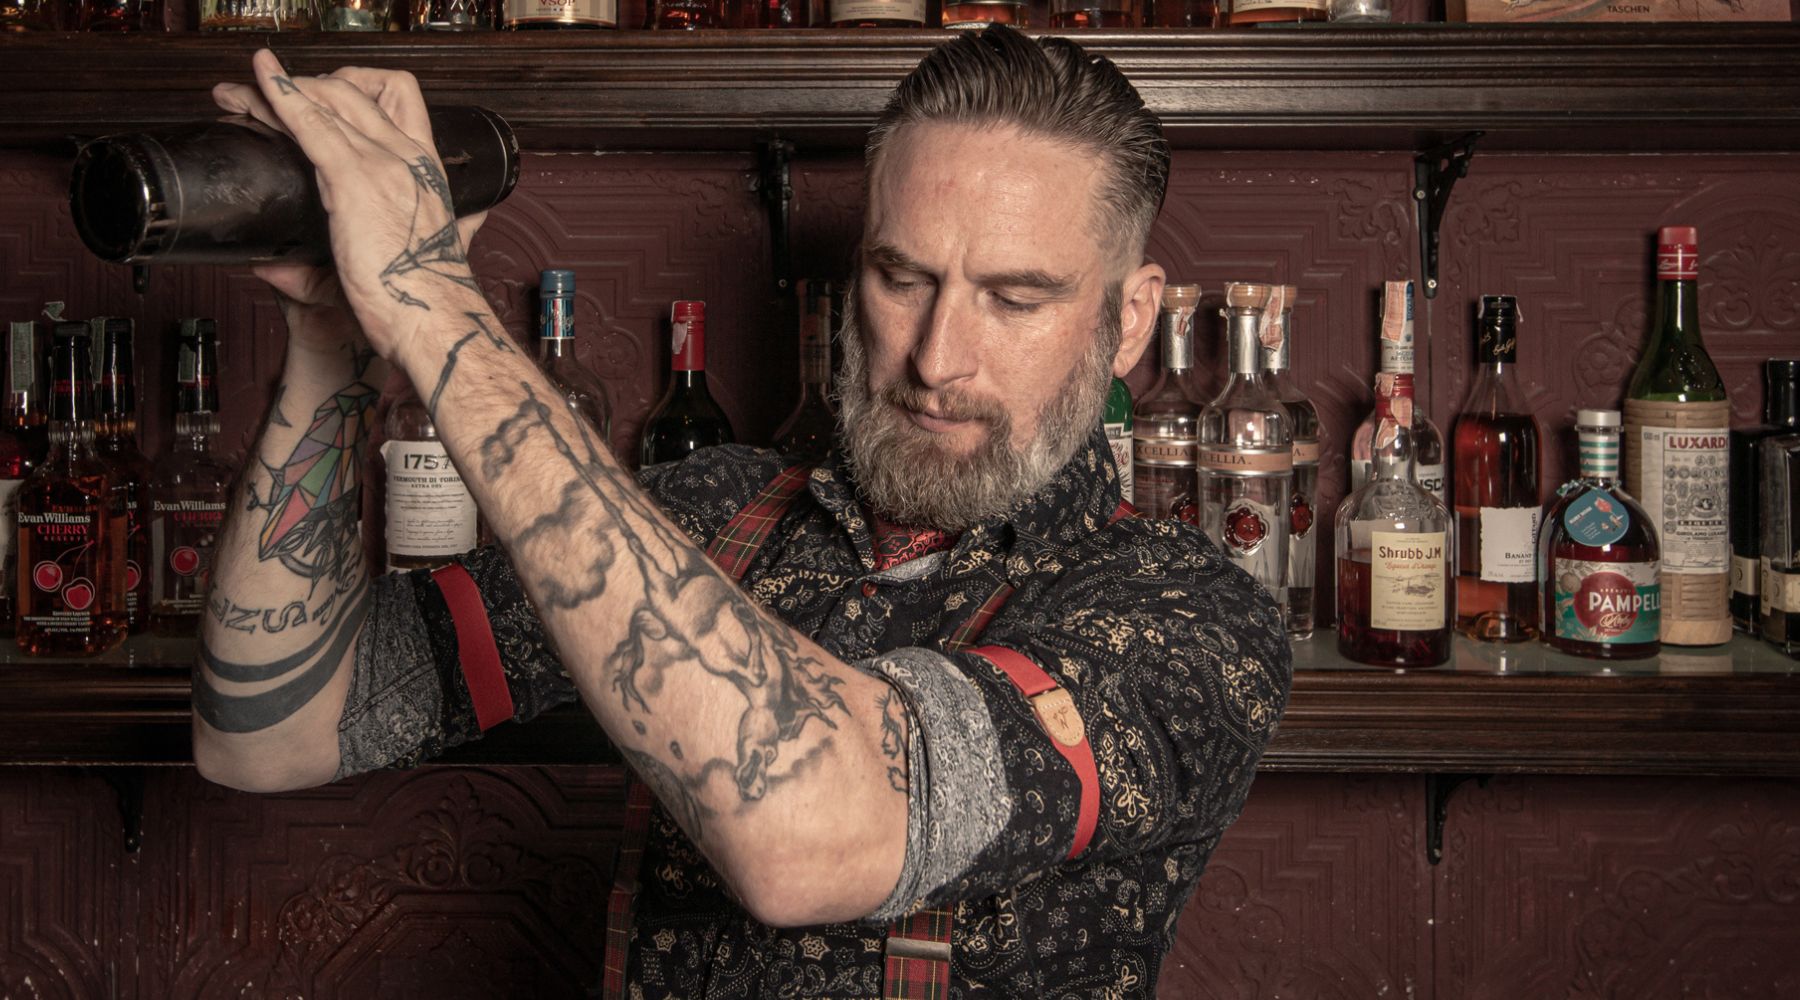 Man standing behind bar with a cocktail shaker in his hands, he is wearing a patterned shirt with red Wiseguy Original Sleeve Garters and Suspenders. He has a beard and Mustache.